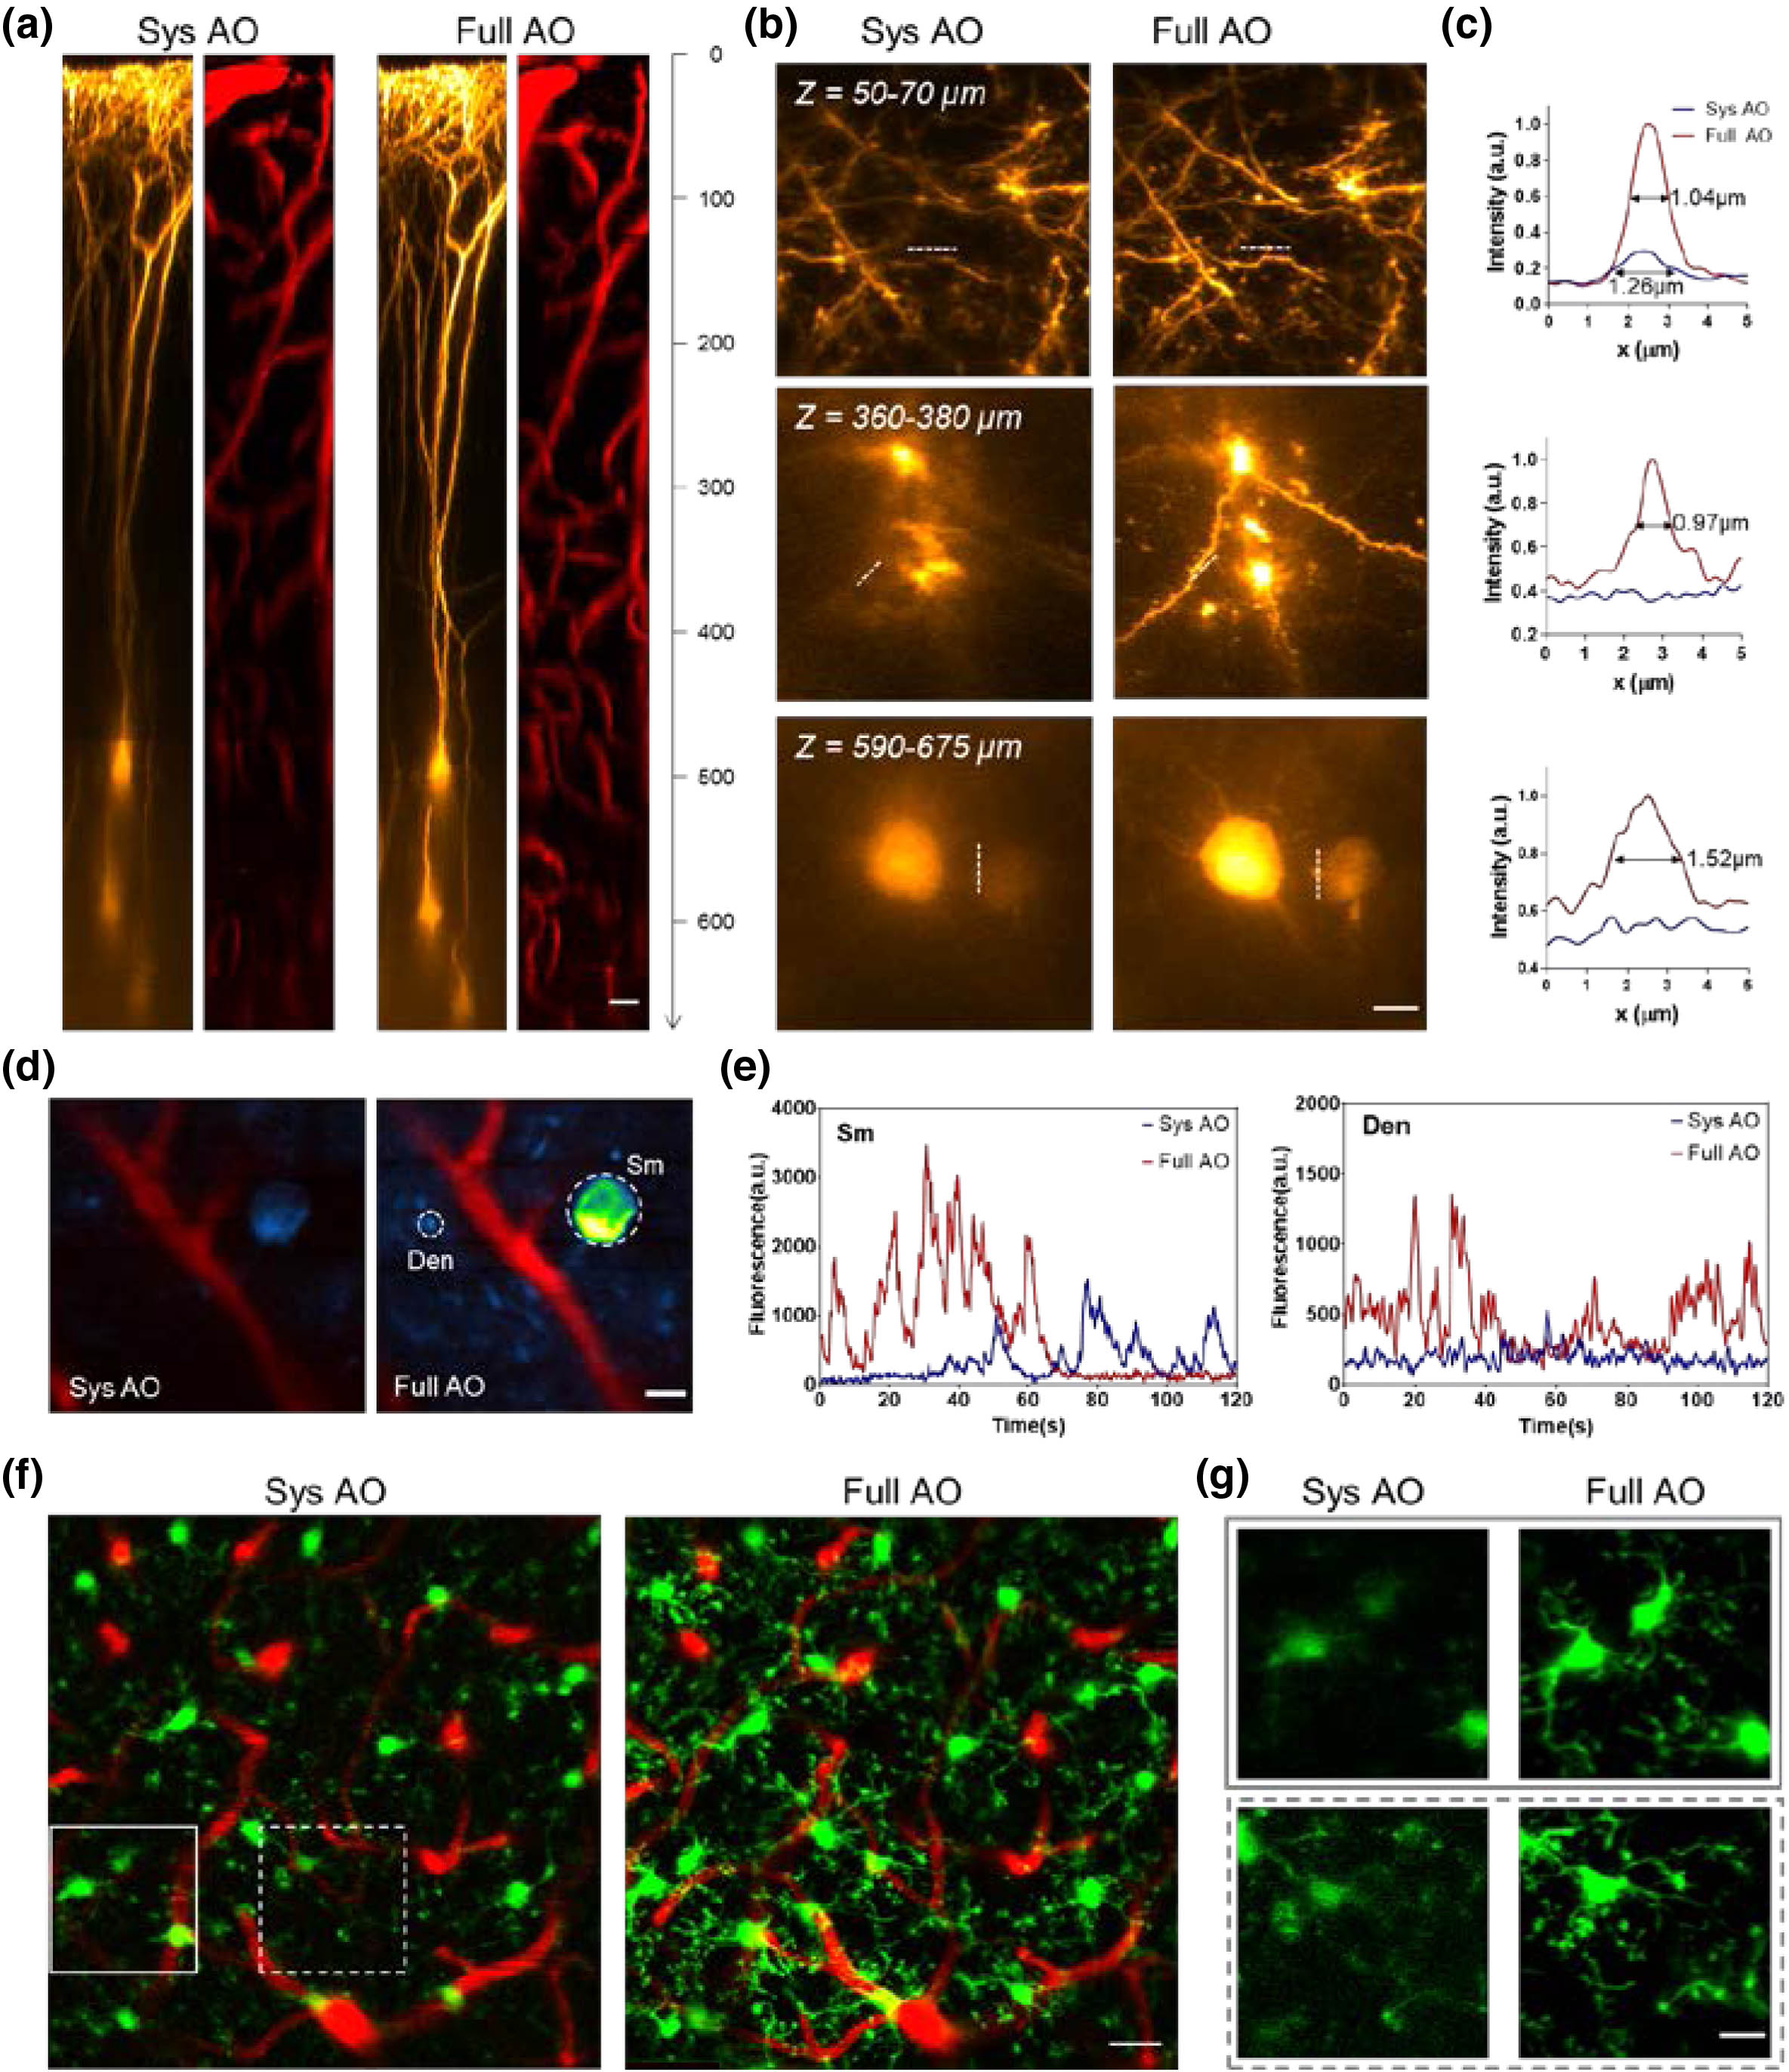 AO improves structural and functional brain imaging in vivo through the thinned-skull window. (a) xz maximum-intensity projection (MIP) images of the pyramidal neurons (orange) and microvasculature (red) in Thy1-YFP mice through a thinned-skull window (50 μm in thickness) with system correction only (left) and full AO correction (right). AO corrections was performed every 50 μm of depth. Similar results were performed at 5 sites from 4 mice, for a total n=5. Scale bar: 20 μm. (b) xy MIP of the stack images in (a). Scale bar: 5 μm. (c) Intensity profiles along the dashed lines in (b) with system (blue) and full (red) AO corrections. Lateral resolutions were estimated in terms of full width at half-maximum (FWHM). (d) In vivo imaging of spontaneous activity of neurons and dendrites in the somatosensory cortex of the CaMPK-GCaMP6s mice under light anesthesia. The neurons are shown as standard-deviation (STD) projections of 600 frames recorded at 340 μm below the pia with only system correction (left) or with full AO correction (right). Similar results for n=6. Scale bar: 10 μm. (e) Fluorescence traces for the soma (Sm) and dendrites (Den) as indicated by the dashed circles in (d). Background fluorescence measured from the nearby vessel location was subtracted from the fluorescence signal. (f) In vivo imaging of microglia (green) and microvessels (red) at 350–400 μm below the pia in the Cx3Cr1-GFP mice with system (left) and full (right) AO corrections. Full AO corrections were performed every 40 μm, and 5×5 subregions were stitched together to form the entire image. Similar results for n=5. Scale bar: 20 μm. (g) Magnified views of the boxed region in (d). Scale bar: 10 μm.